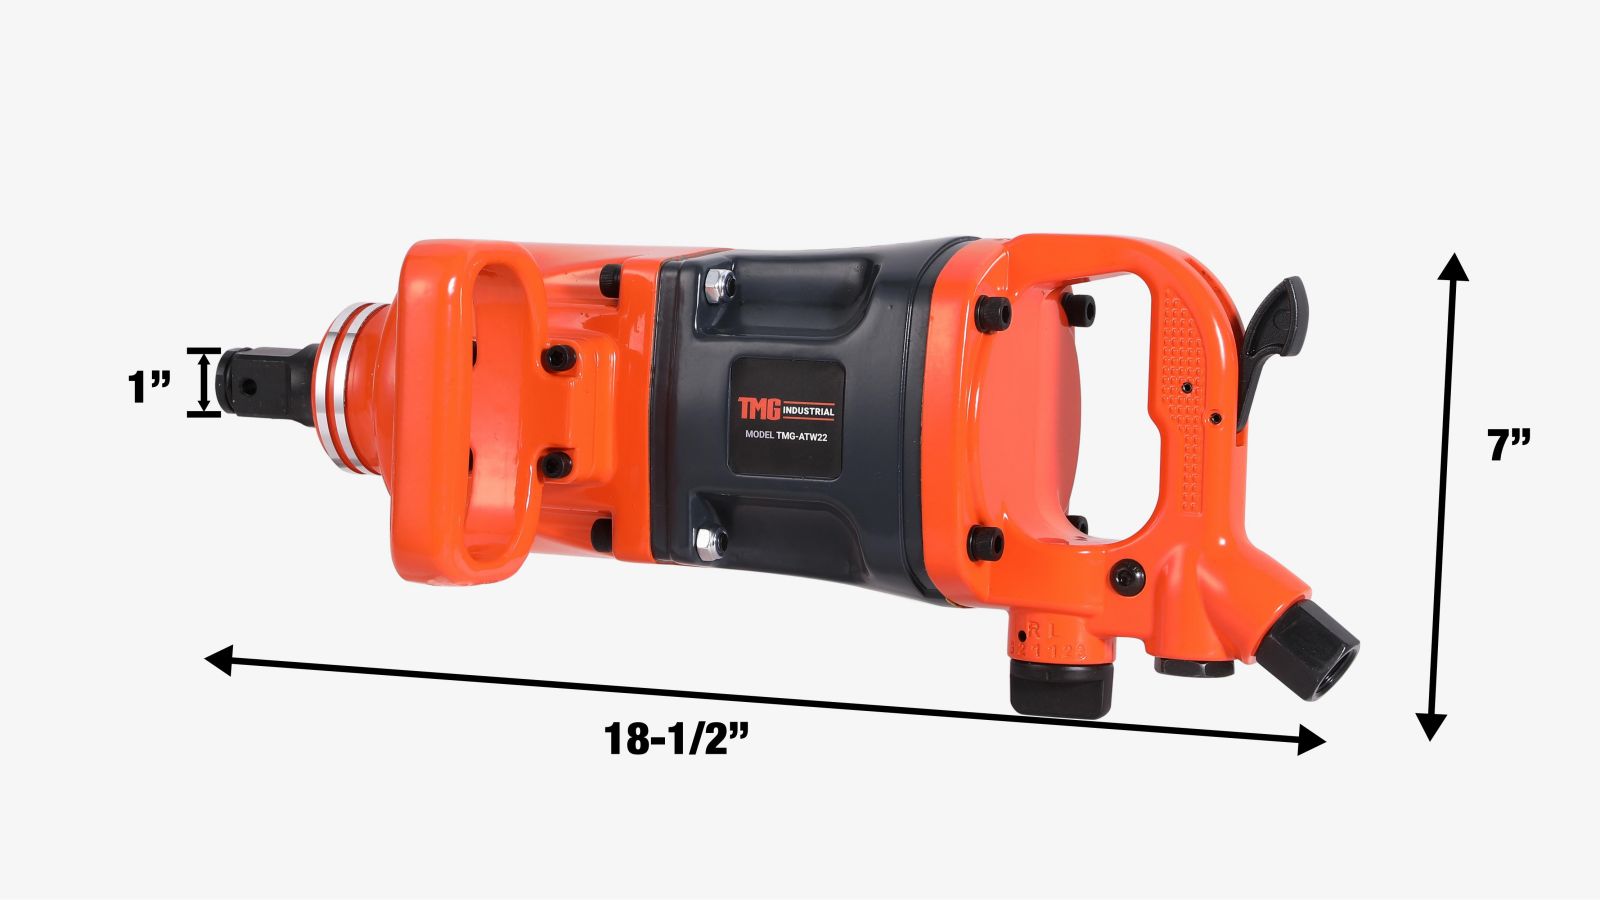 TMG Industrial 1” Drive 2200 ft-lb Pneumatic Impact Wrench Hammer, Aluminum Alloy Housing, 175 PSI, TMG-ATW22-specifications-image